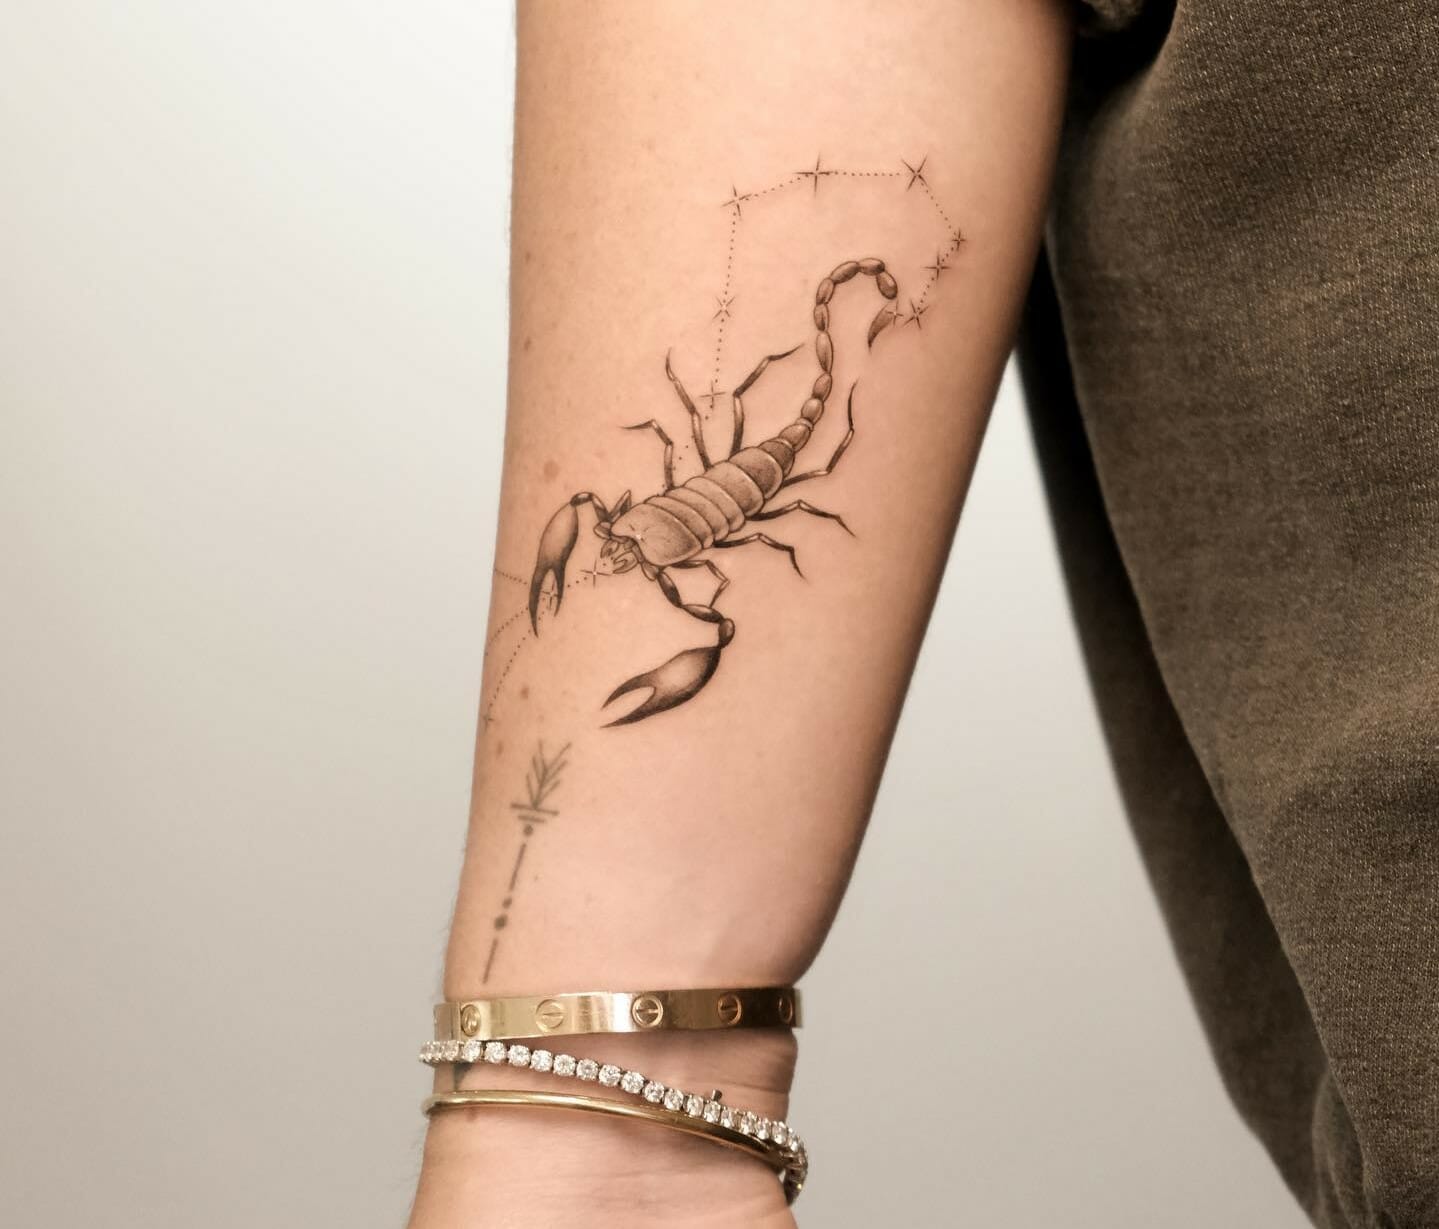 35 Best Scorpio Tattoo Ideas and Designs for 2021